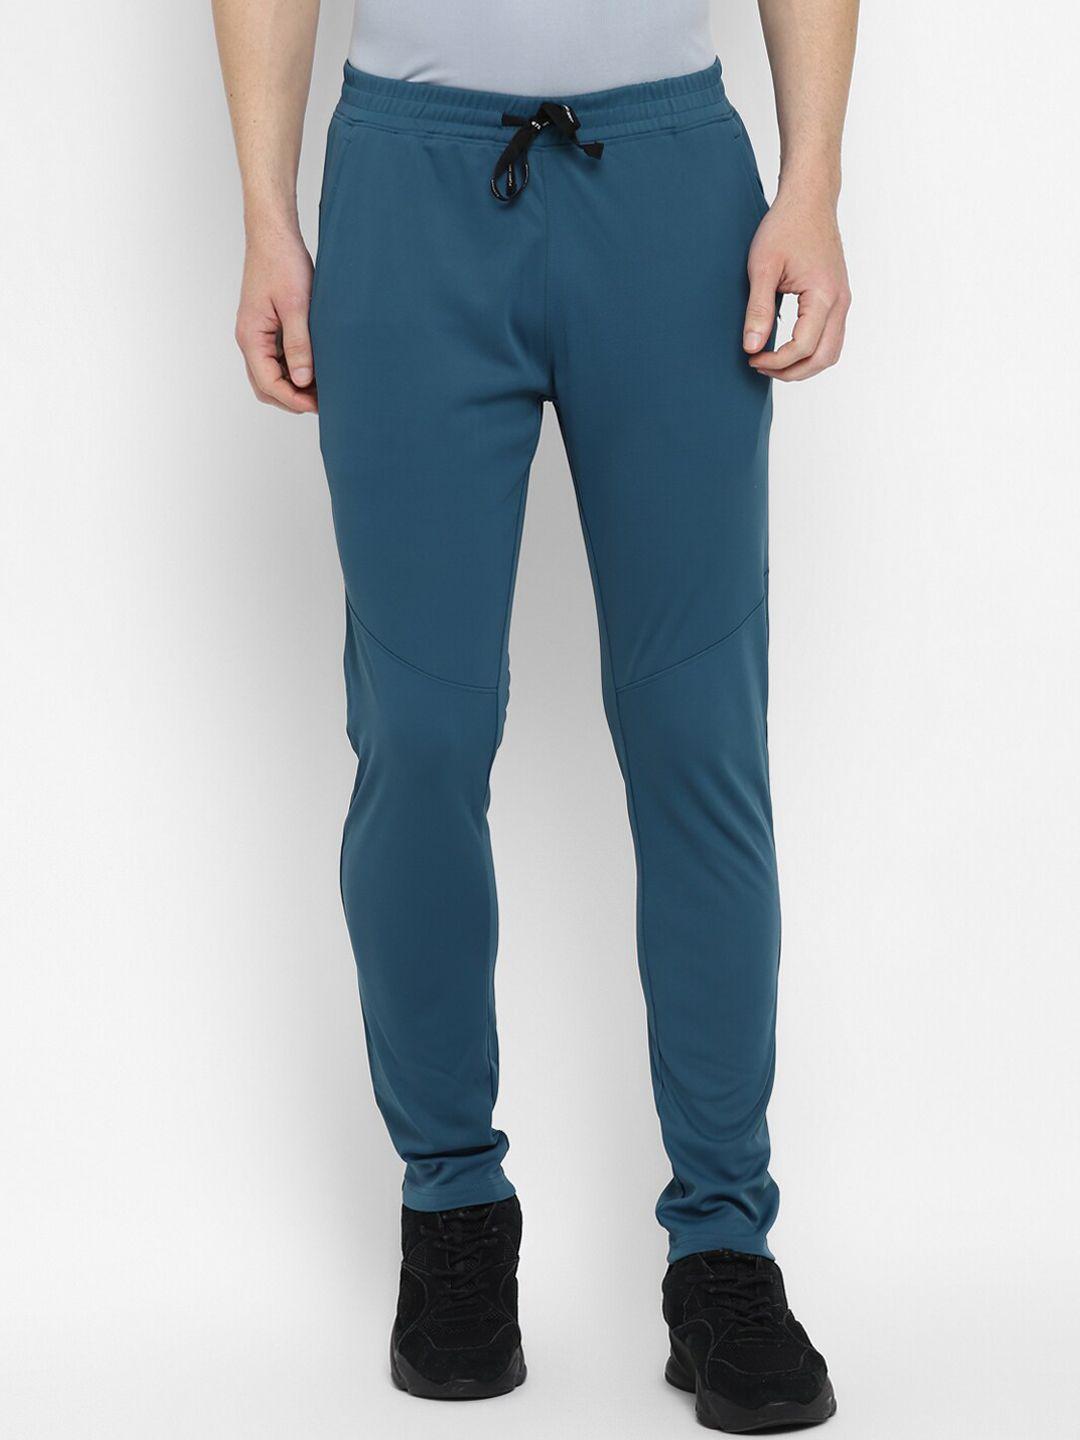 furo-by-red-chief-men-casual-fit-track-pants